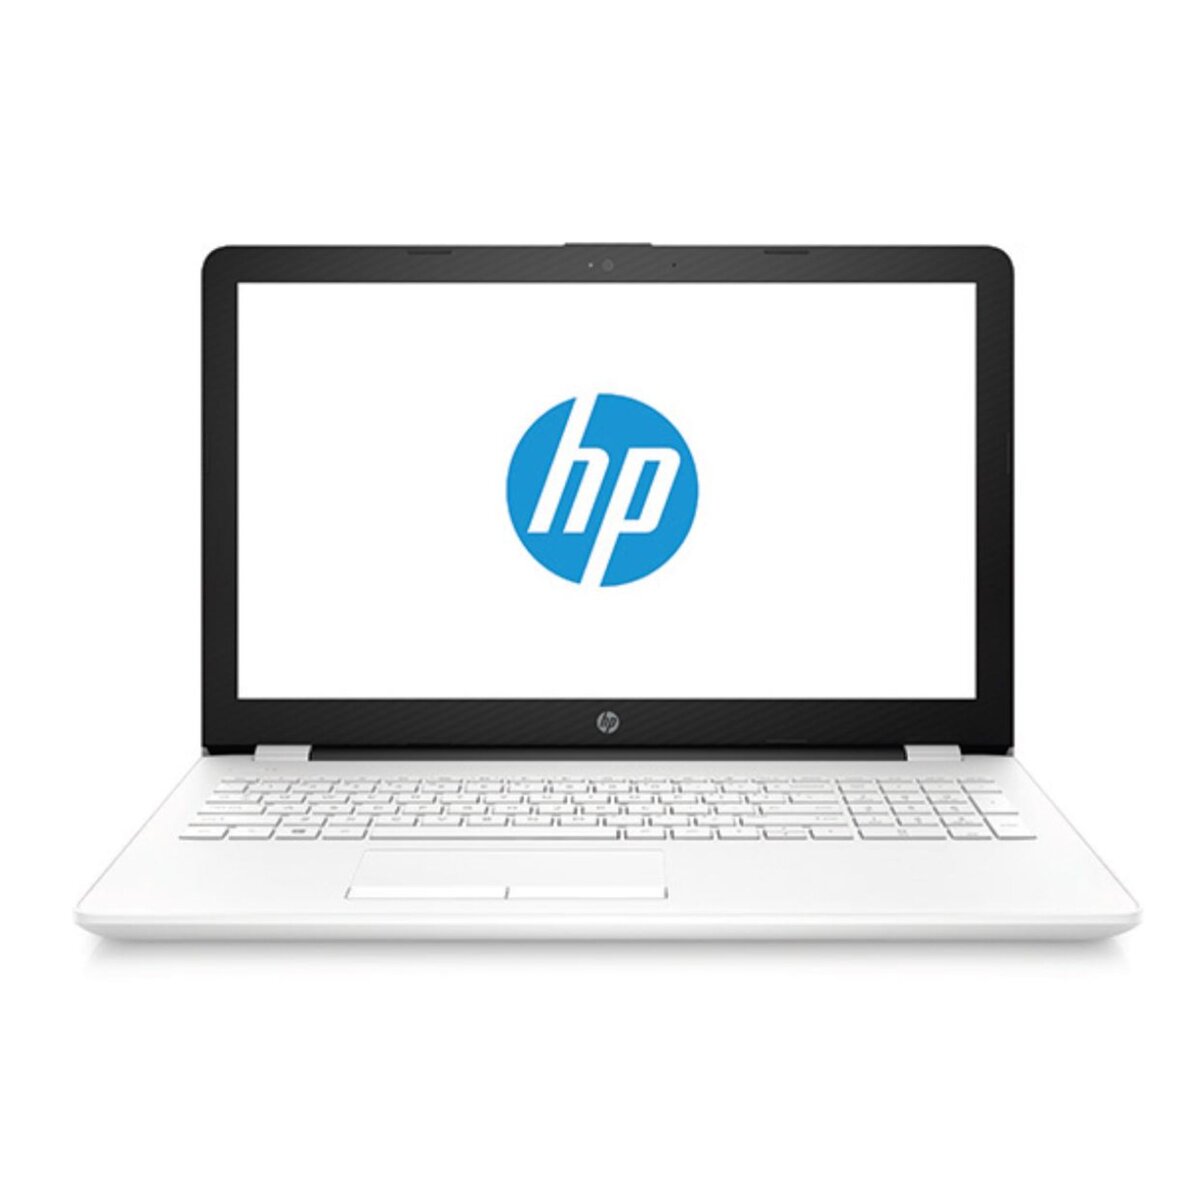 HP Ordinateur portable Notebook 15-bw063nf - 1 To - Blanc